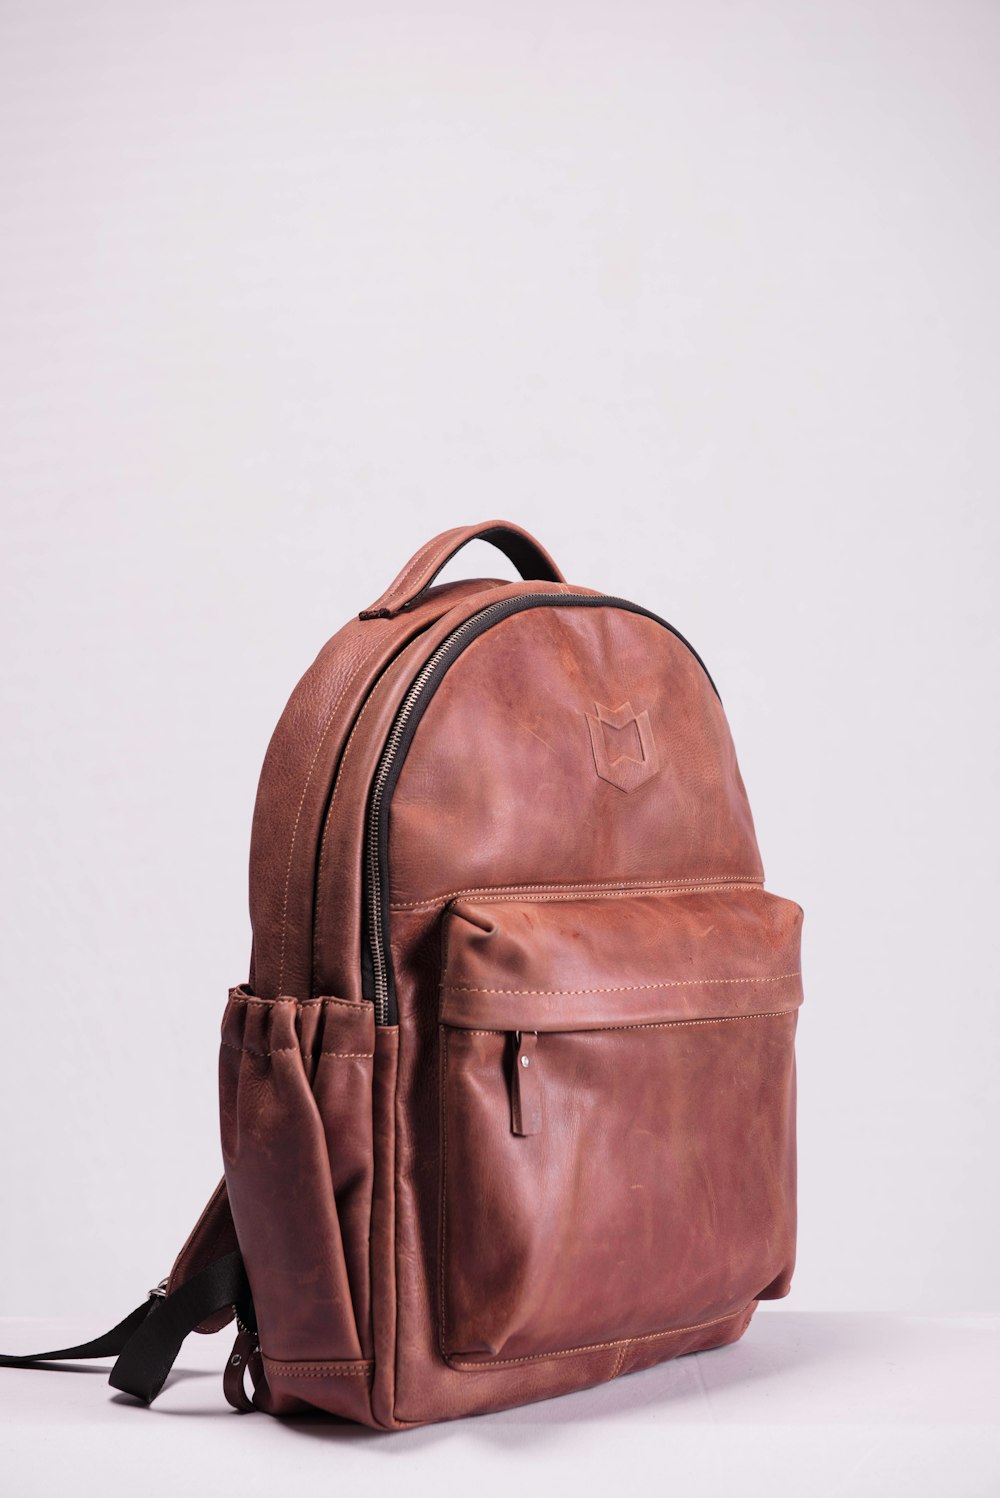 brown leather backpack on white wall